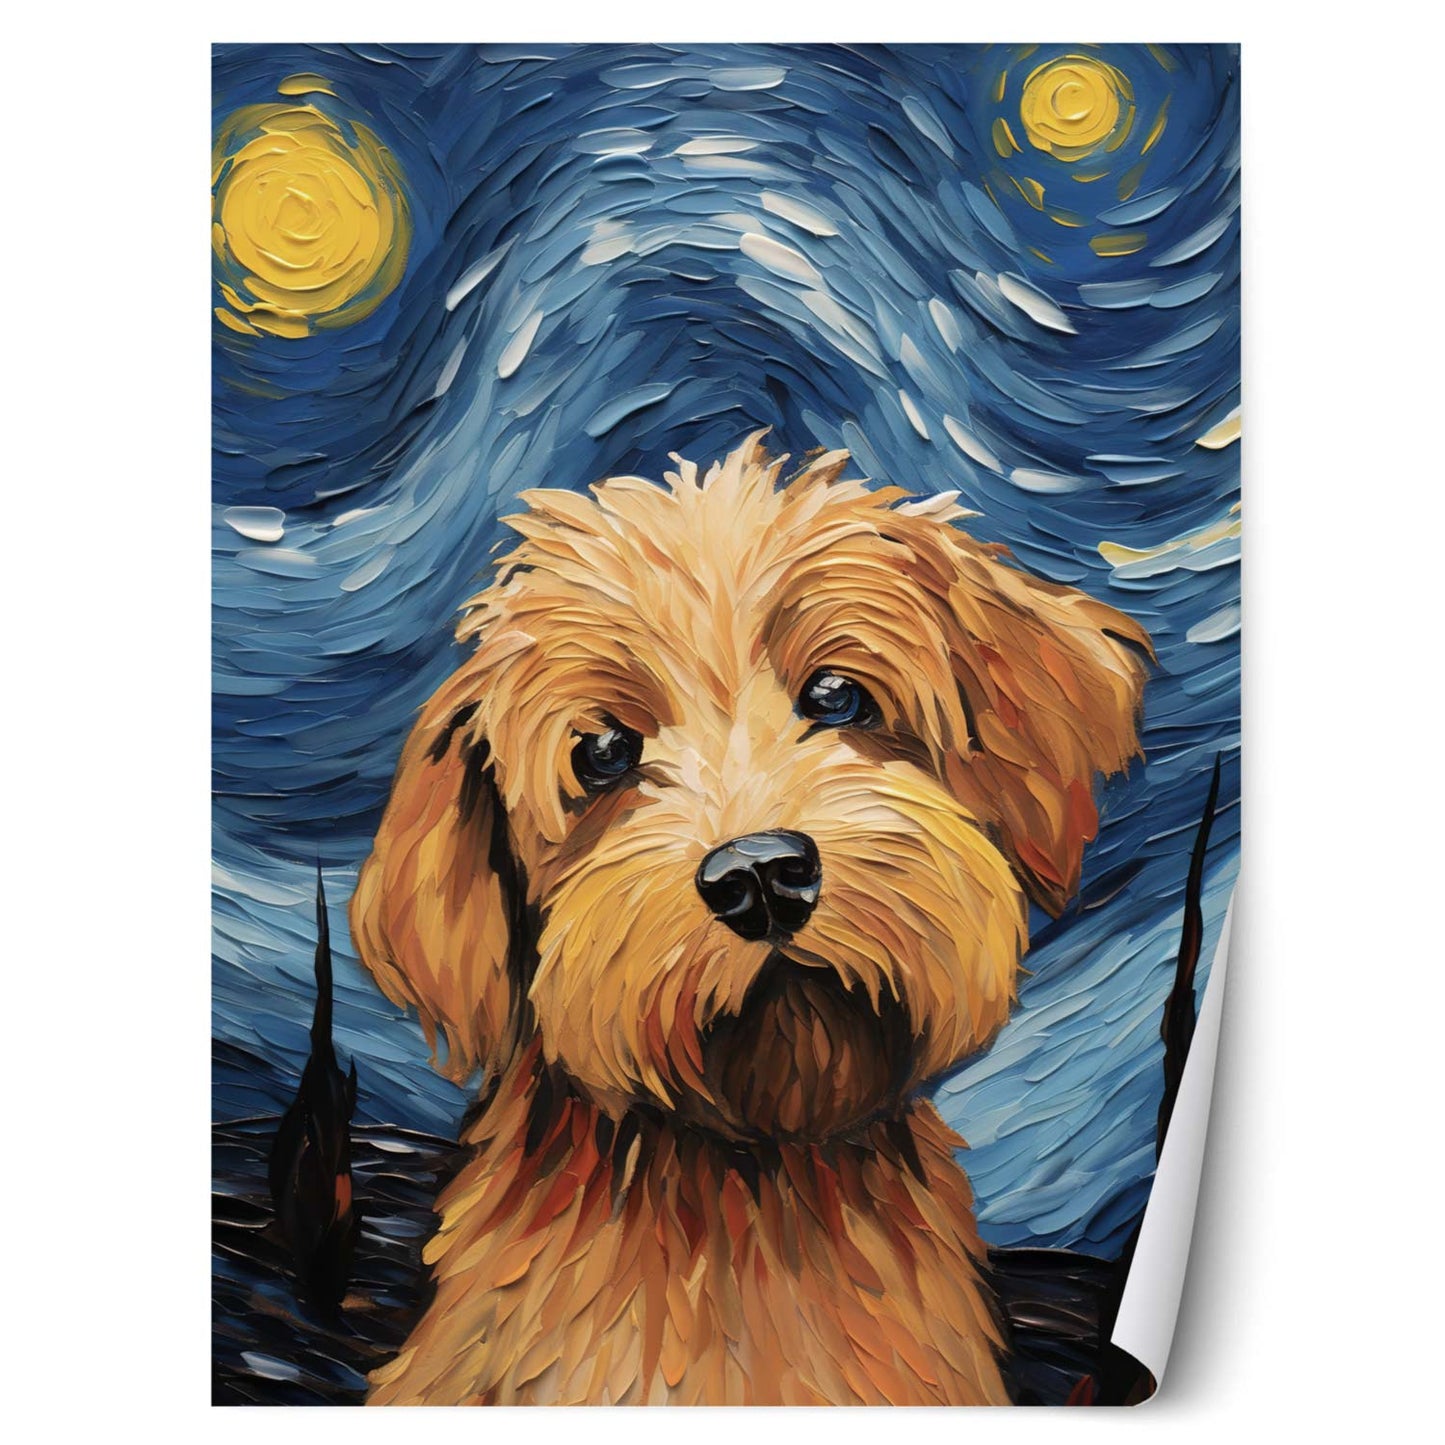 Starry Night Poodle Poster